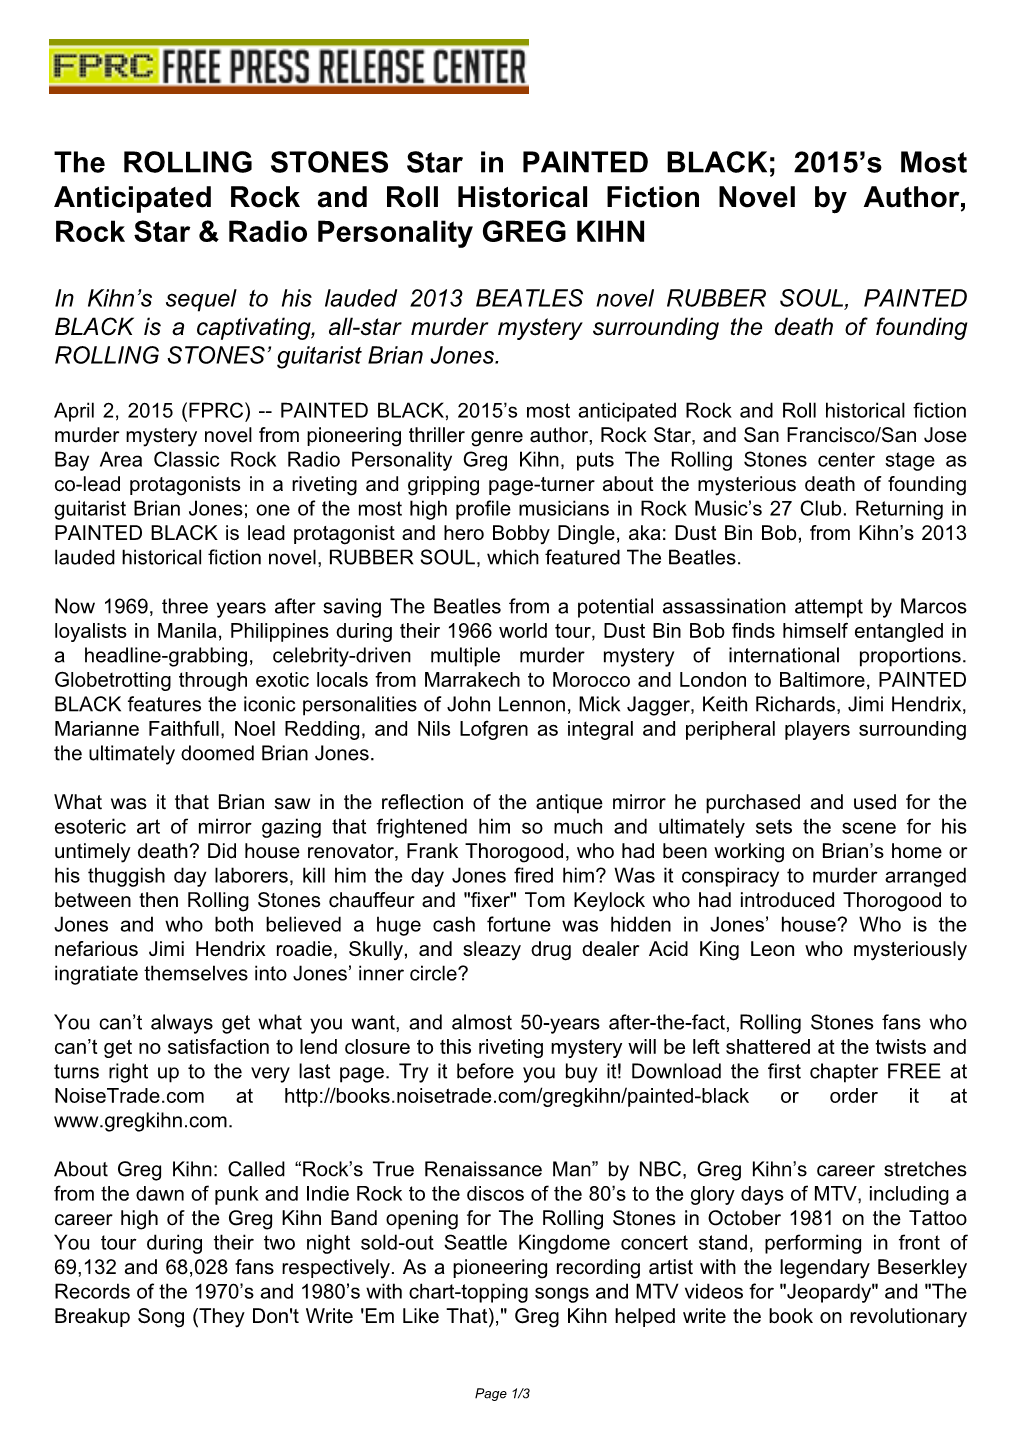 The ROLLING STONES Star in PAINTED BLACK; 2015’S Most Anticipated Rock and Roll Historical Fiction Novel by Author, Rock Star & Radio Personality GREG KIHN